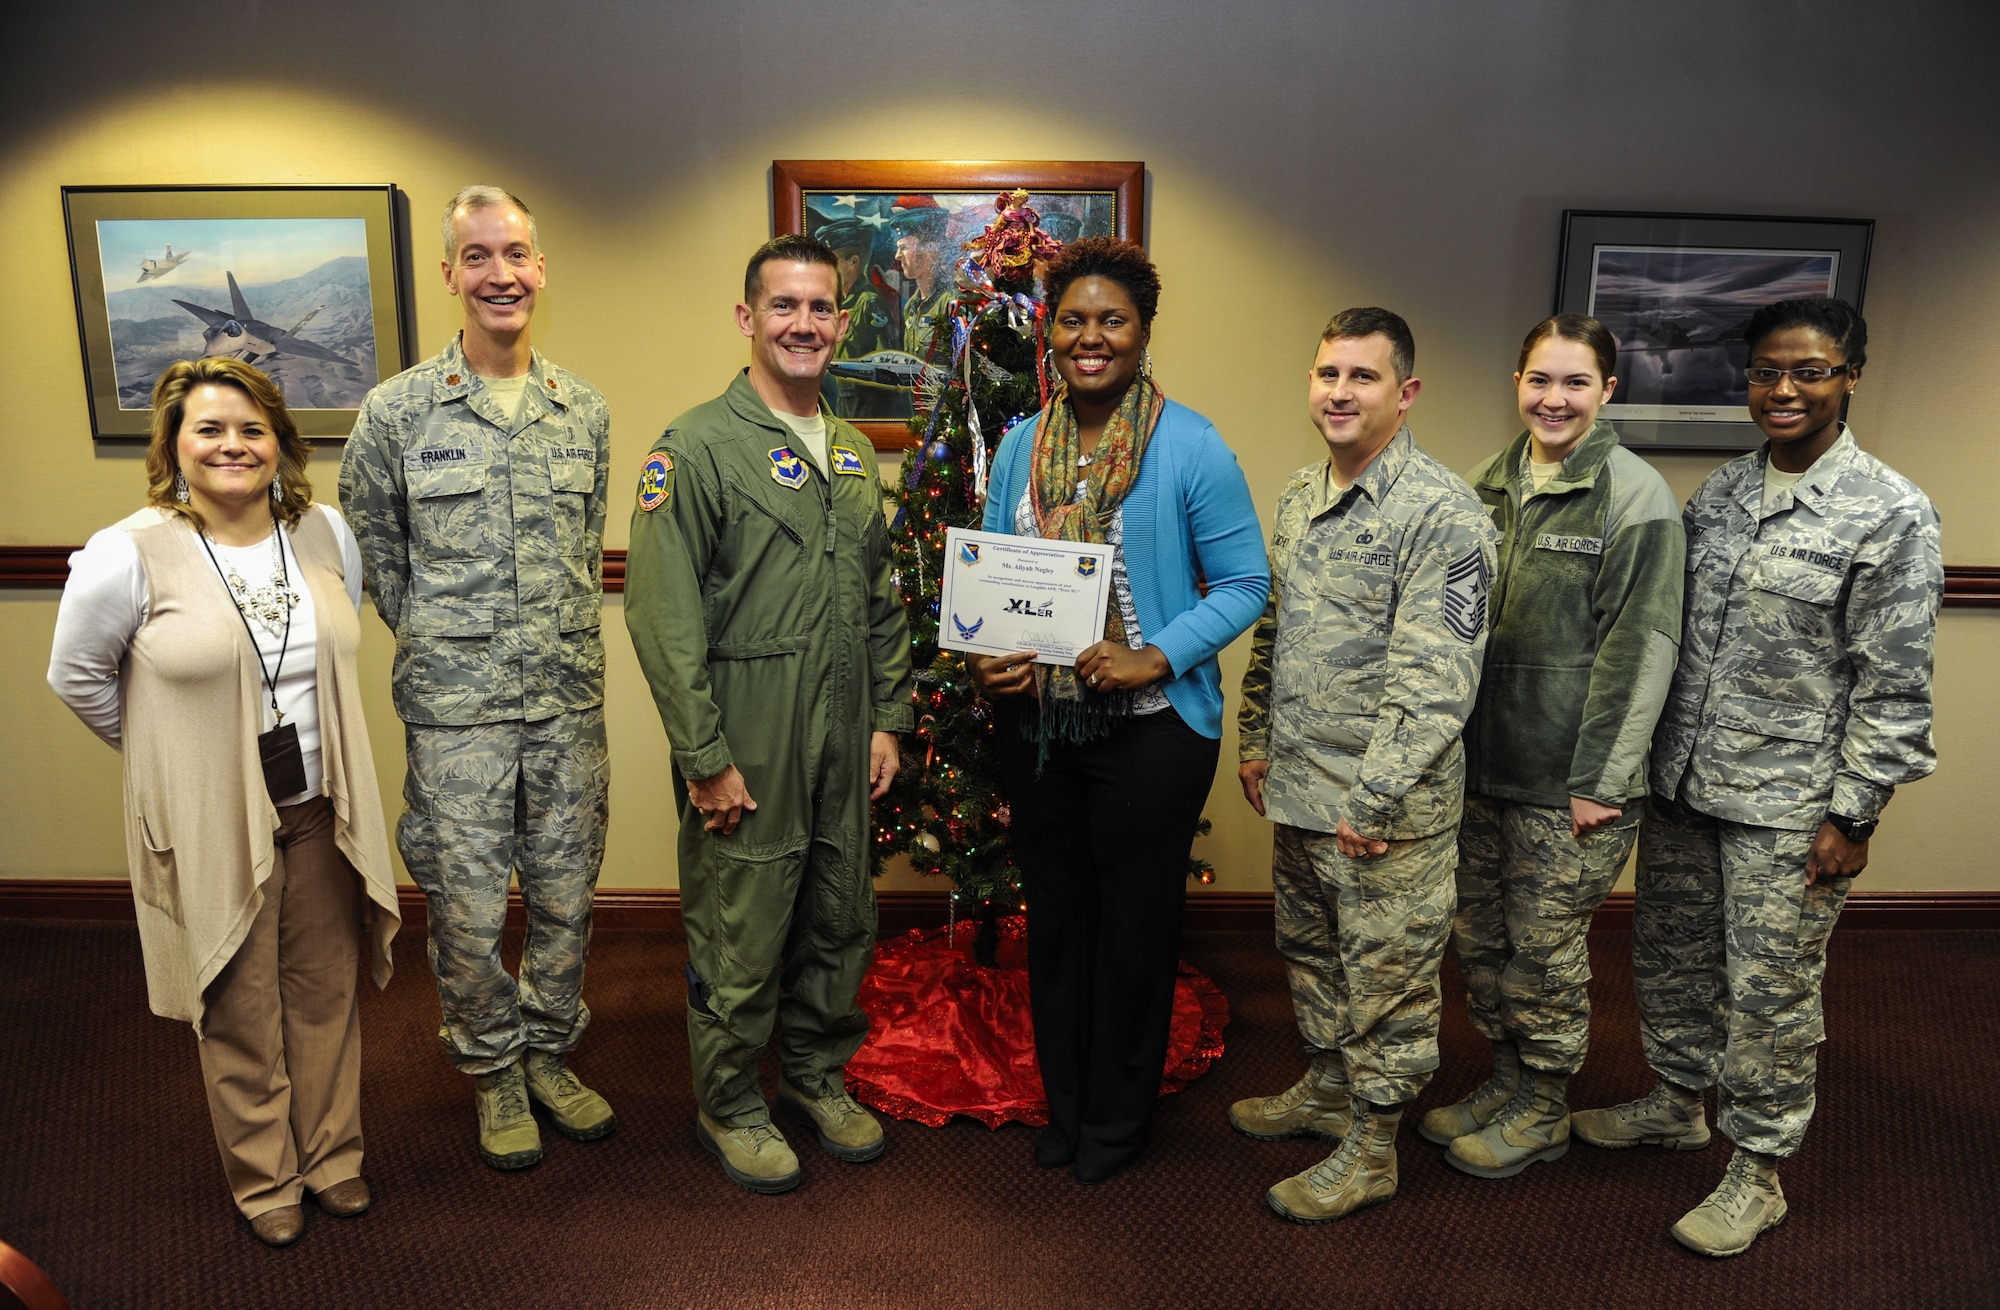 Aliyah Negley, 47th Flying Training Wing community support coordinator, was chosen by wing leadership to be “XLer of the week”, for the week of Dec. 13, 2017. The “XLer” award, presented by Col. Charlie Velino, 47th Flying Training Wing wing commander, is given to those who consistently make outstanding contributions to their unit and the Laughlin mission.